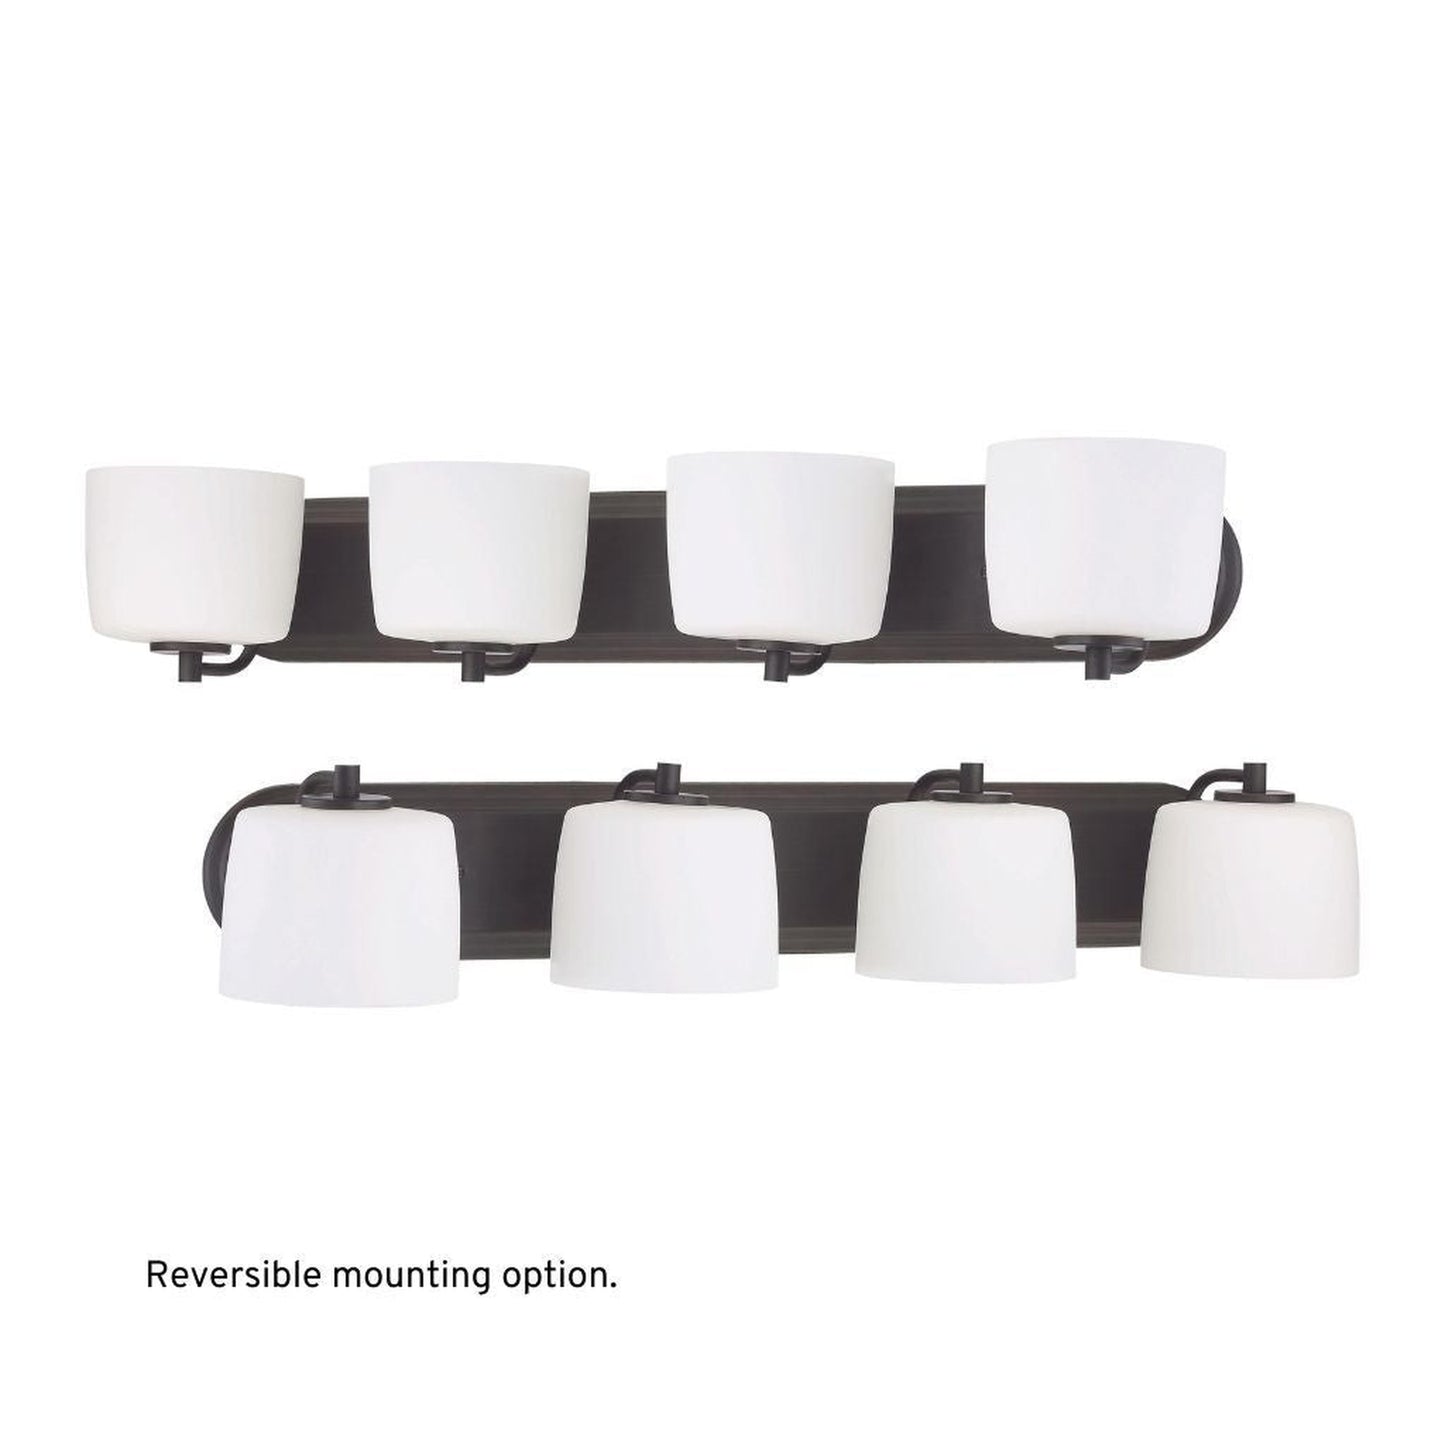 Craftmade Clarendon 32" 4-Light Aged Brushed Bronze Vanity Light With White Opal Glass Shades